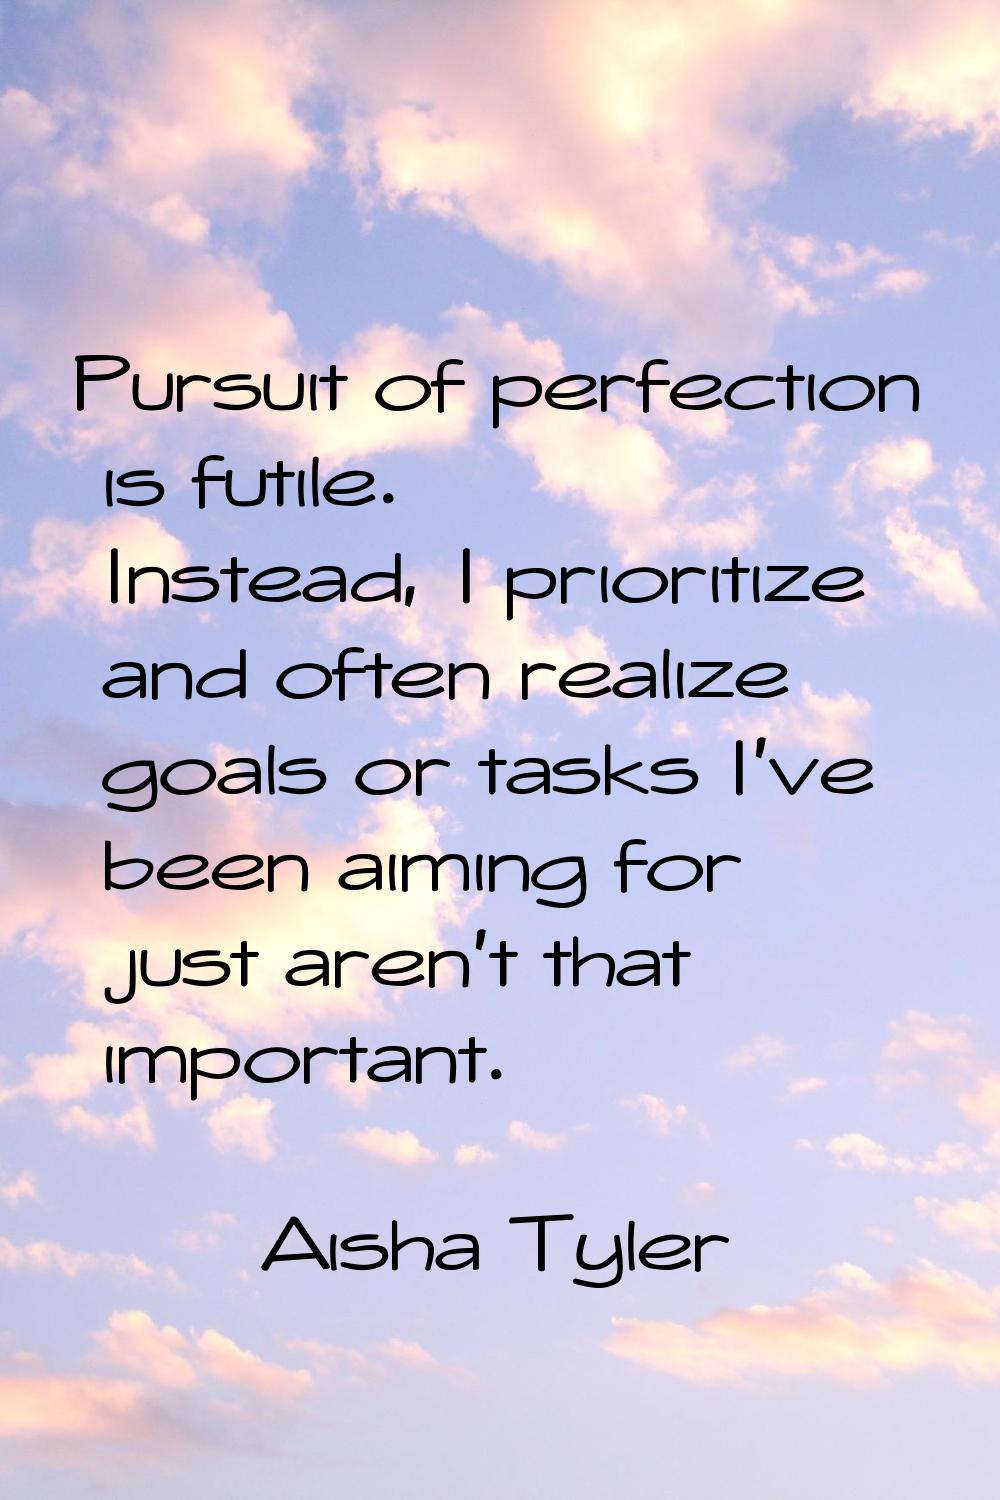 Pursuit of perfection is futile. Instead, I prioritize and often realize goals or tasks I've been a